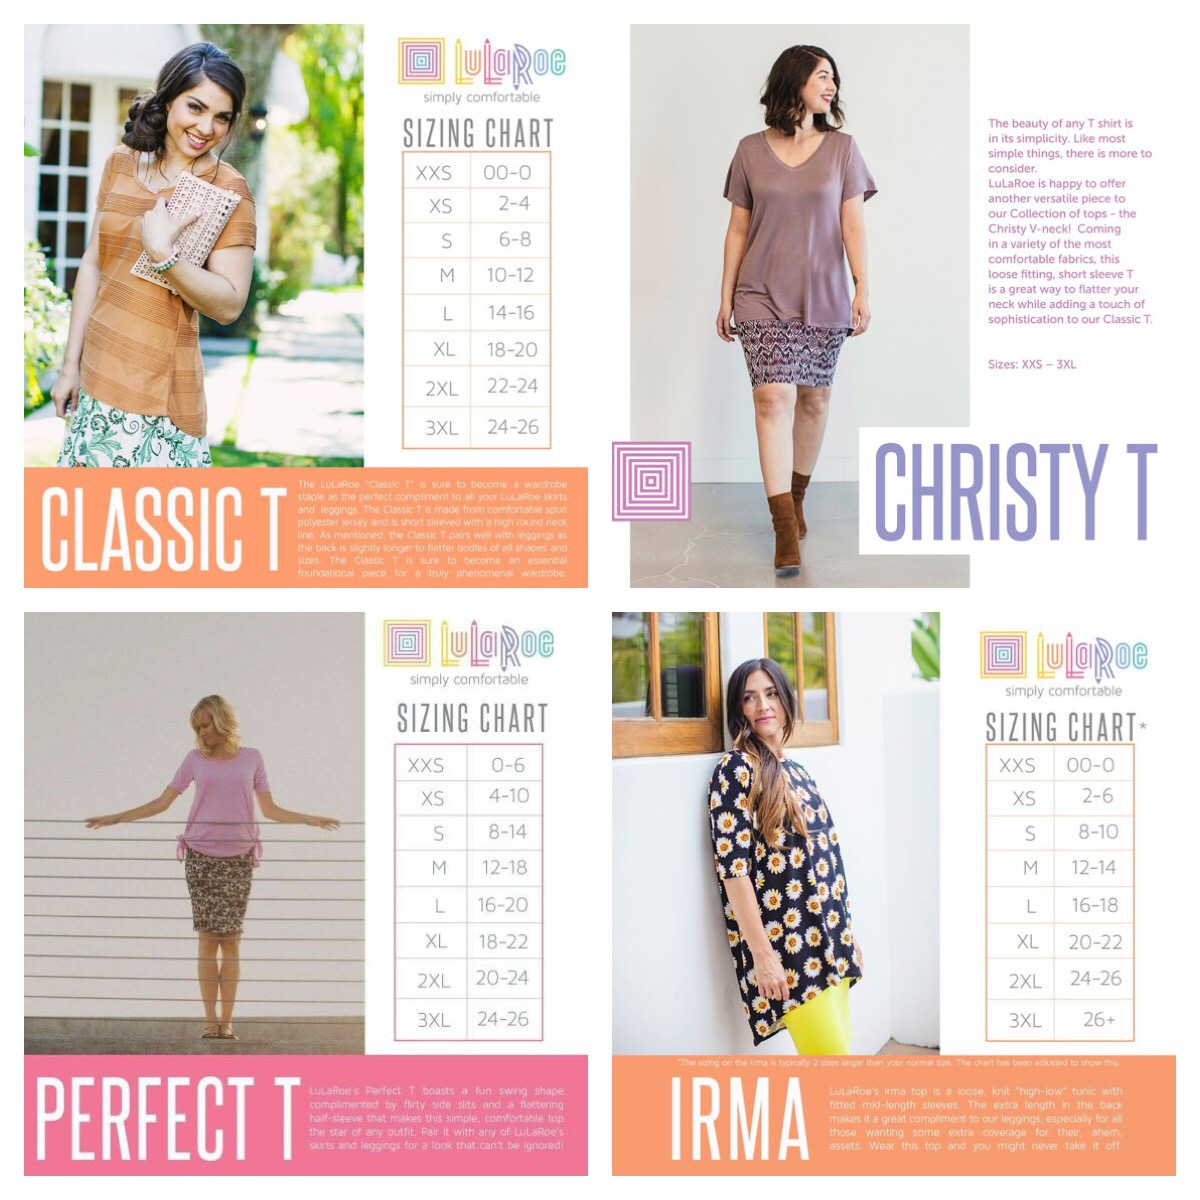 Christy T Description and Size Guide by LuLaRoe! These new LuLaRoe